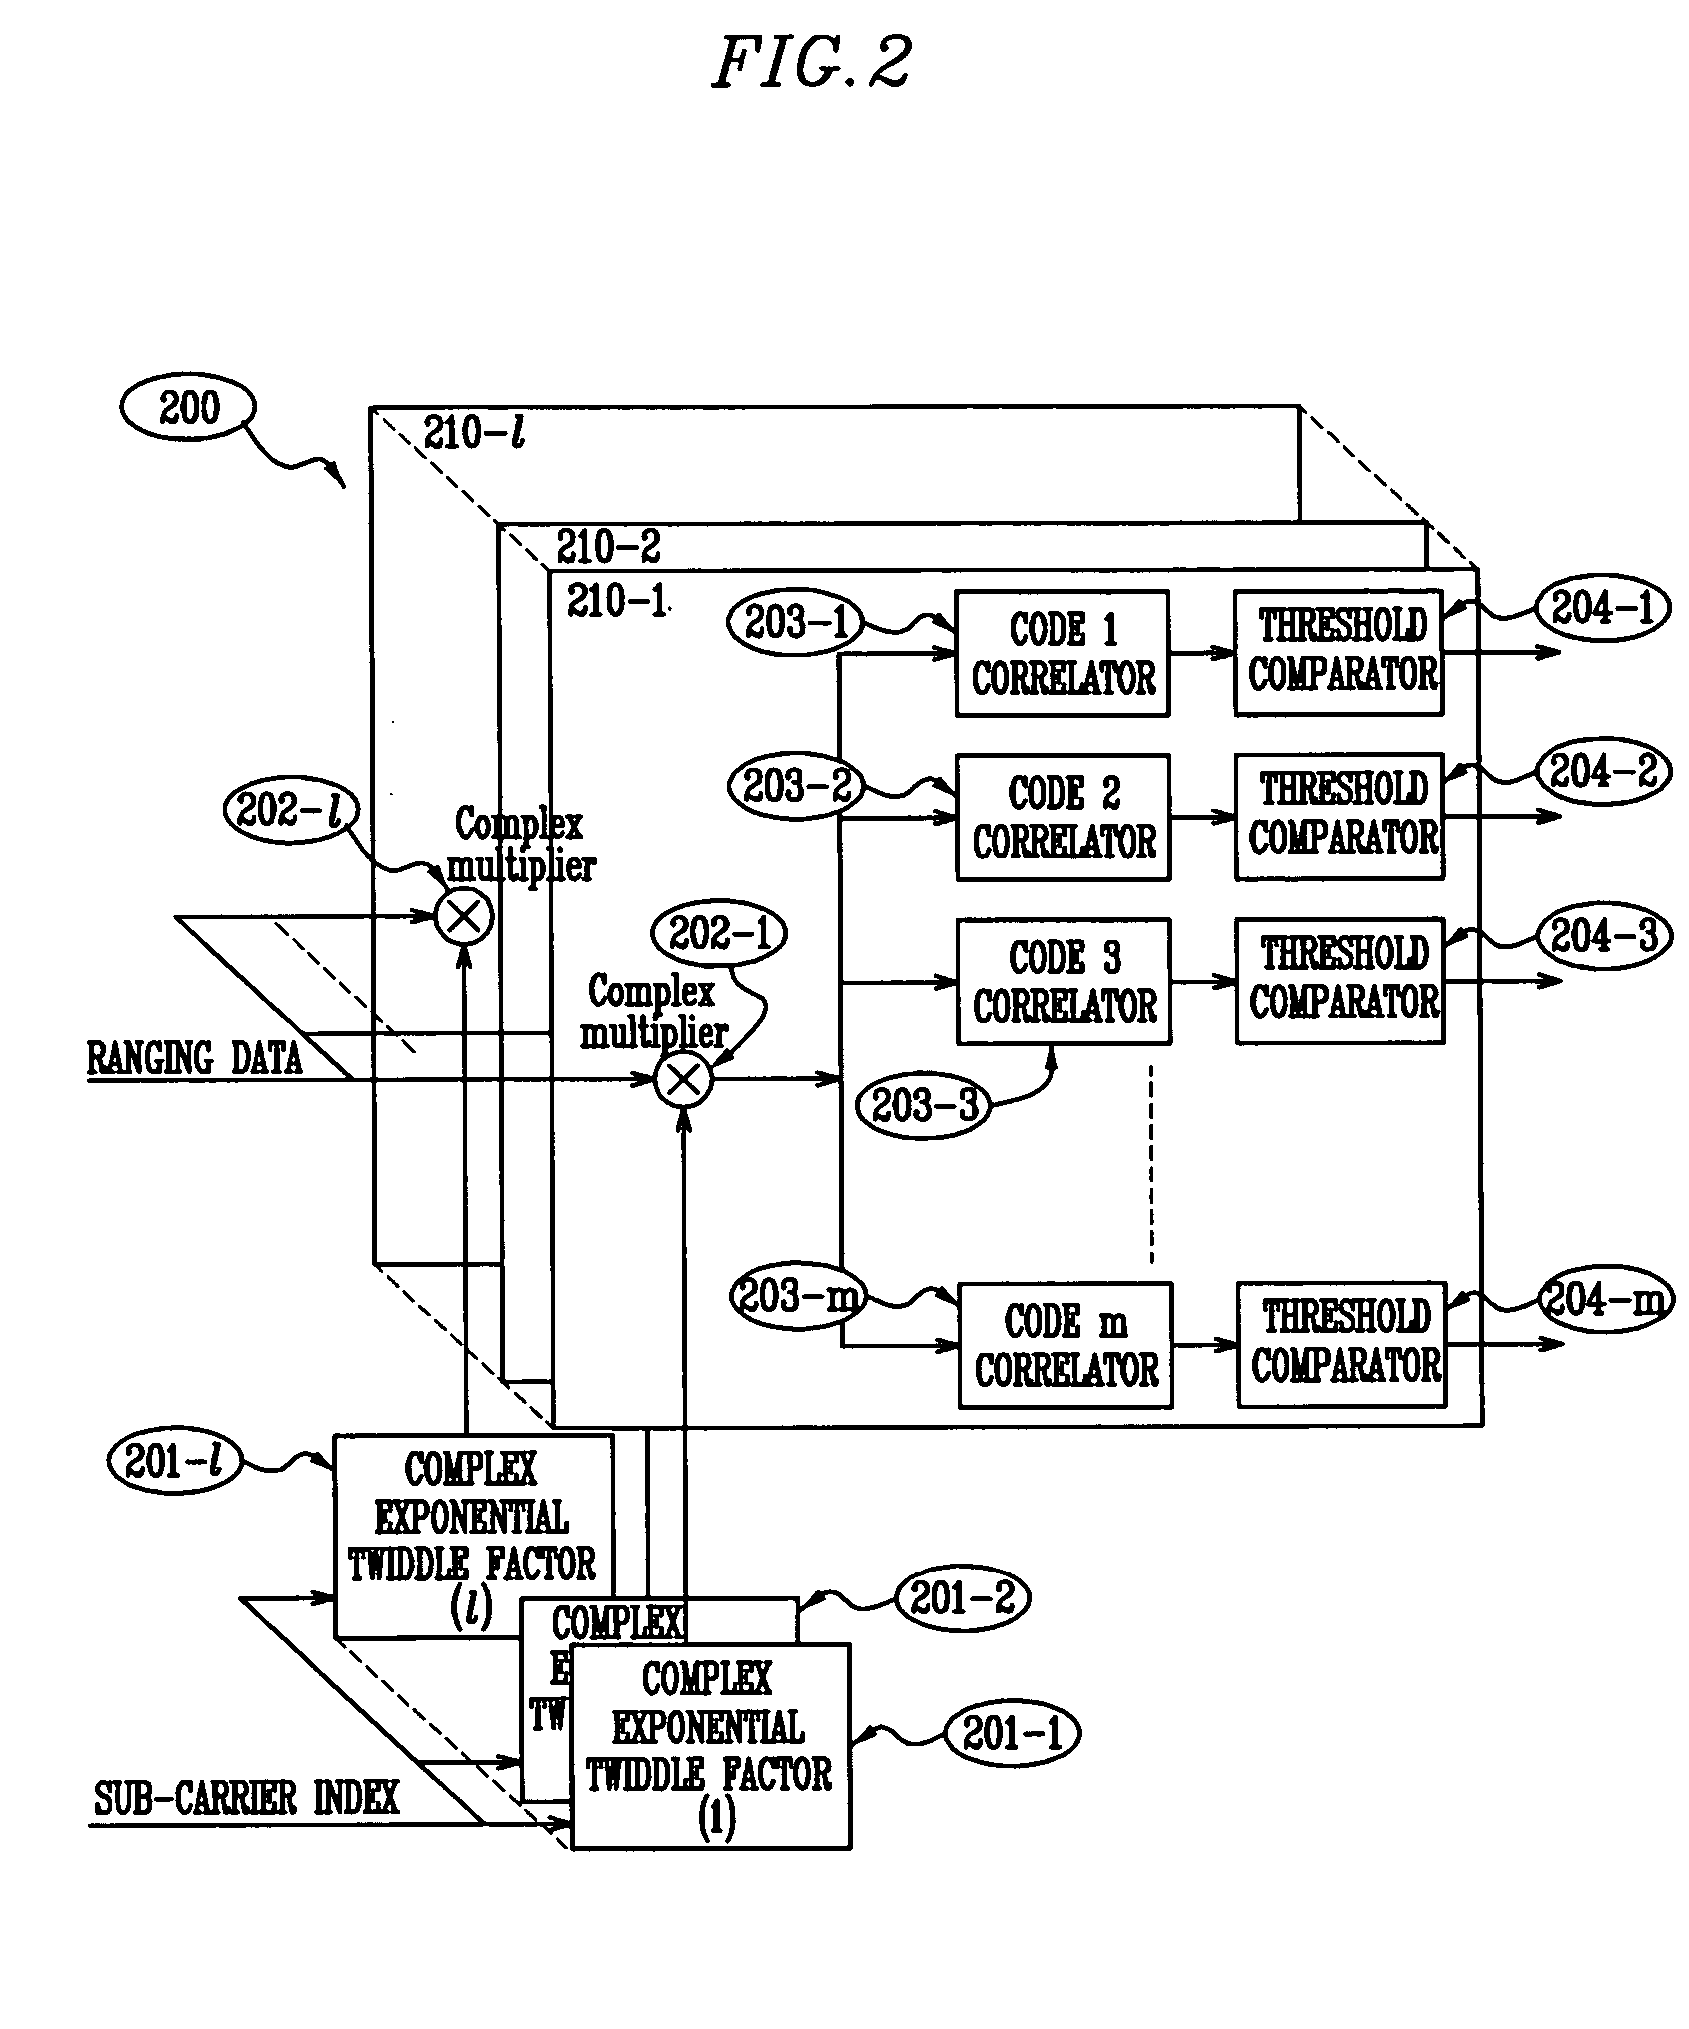 Uplink ranging system and method in OFDMA system